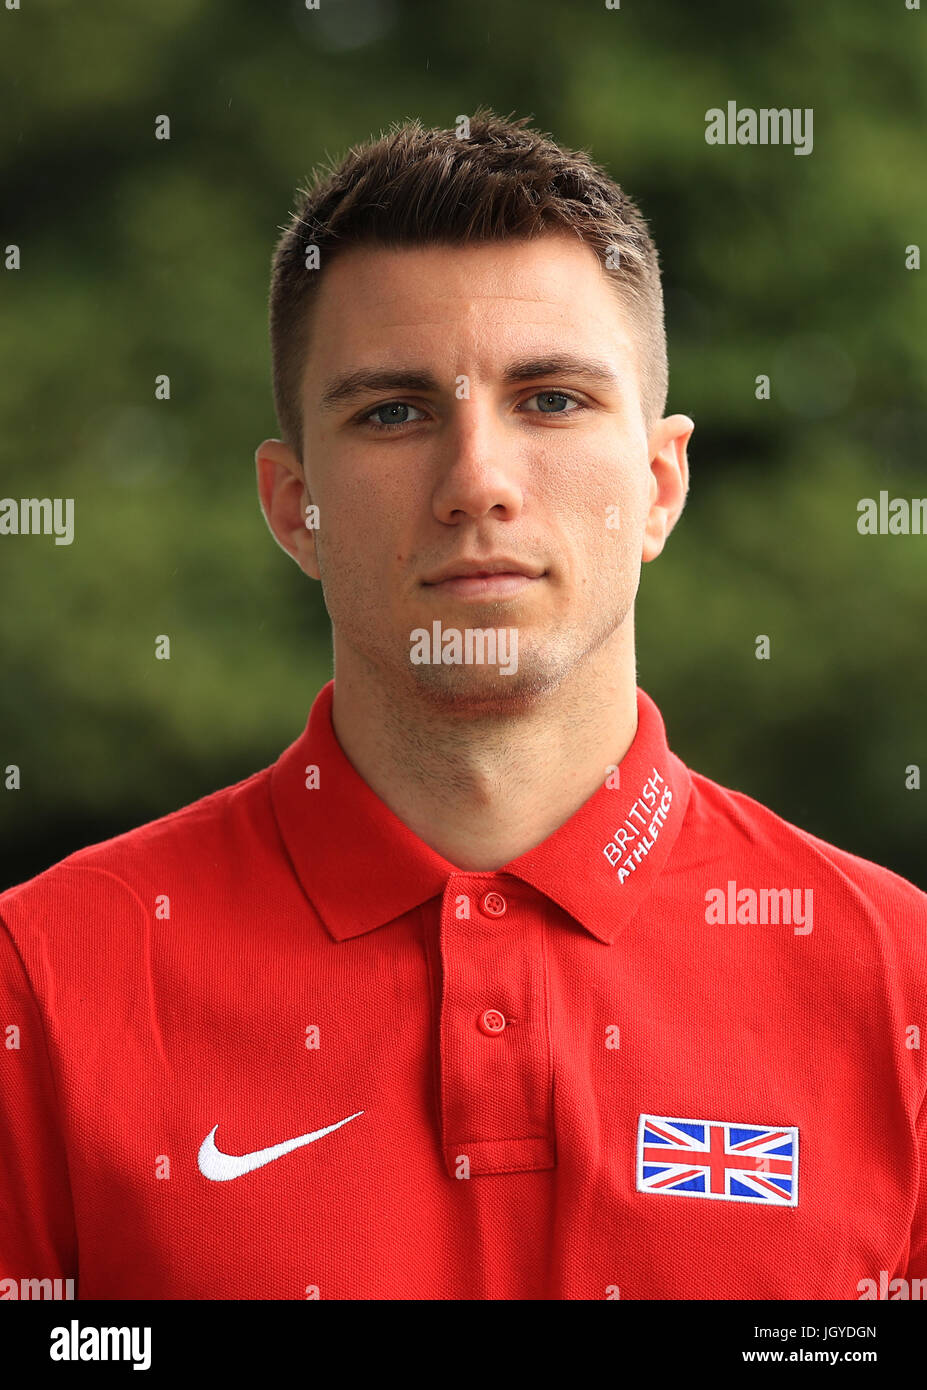 Hurdler Andrew Pozzi during the team announcement ahead of the IAAF World Championships, at the Loughborough University High Performance Centre. Stock Photo